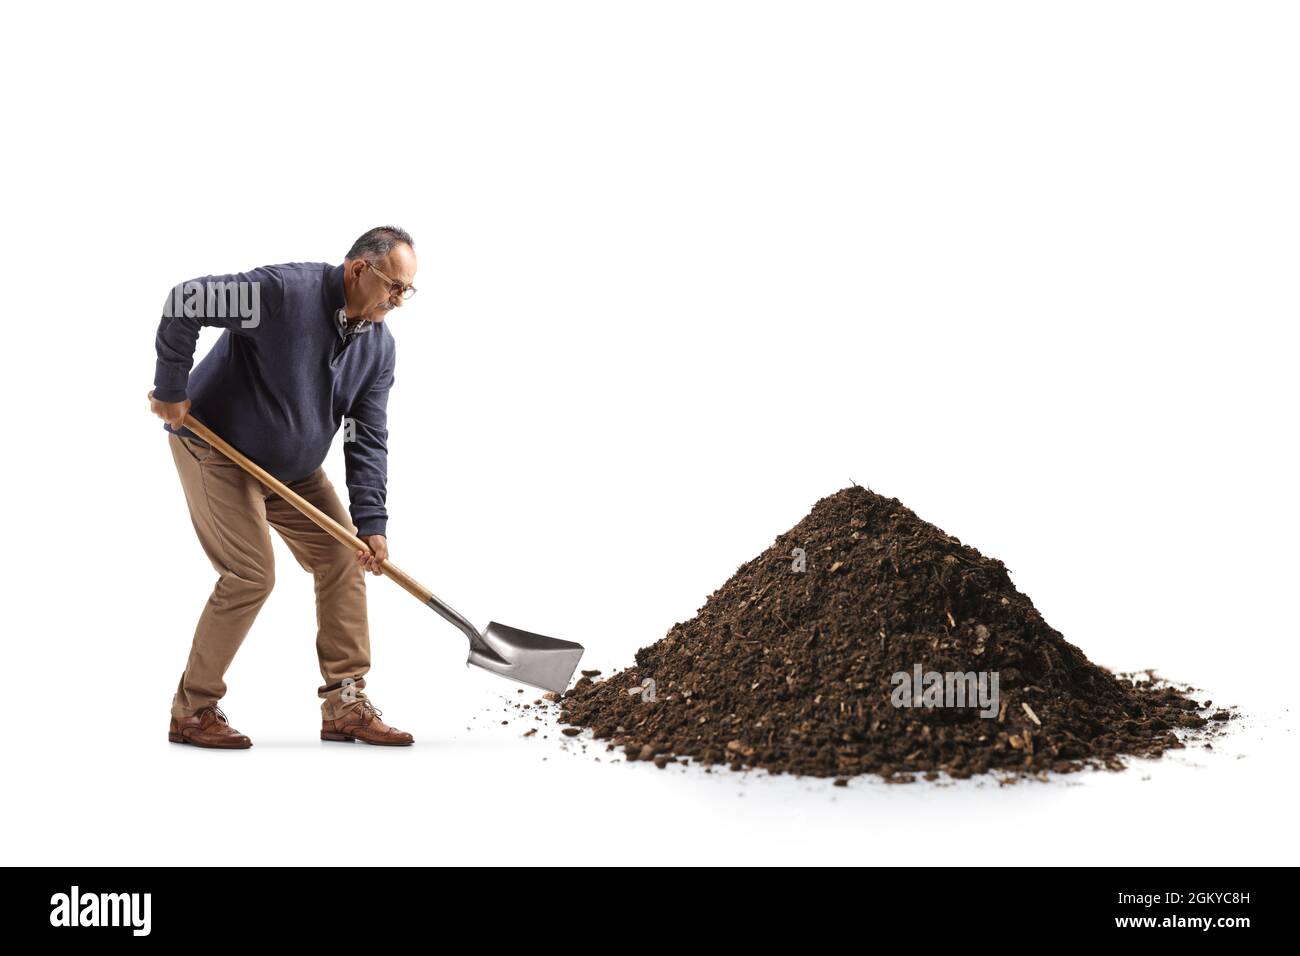 Pile of soil with a shovel Cut Out Stock Images & Pictures - Alamy